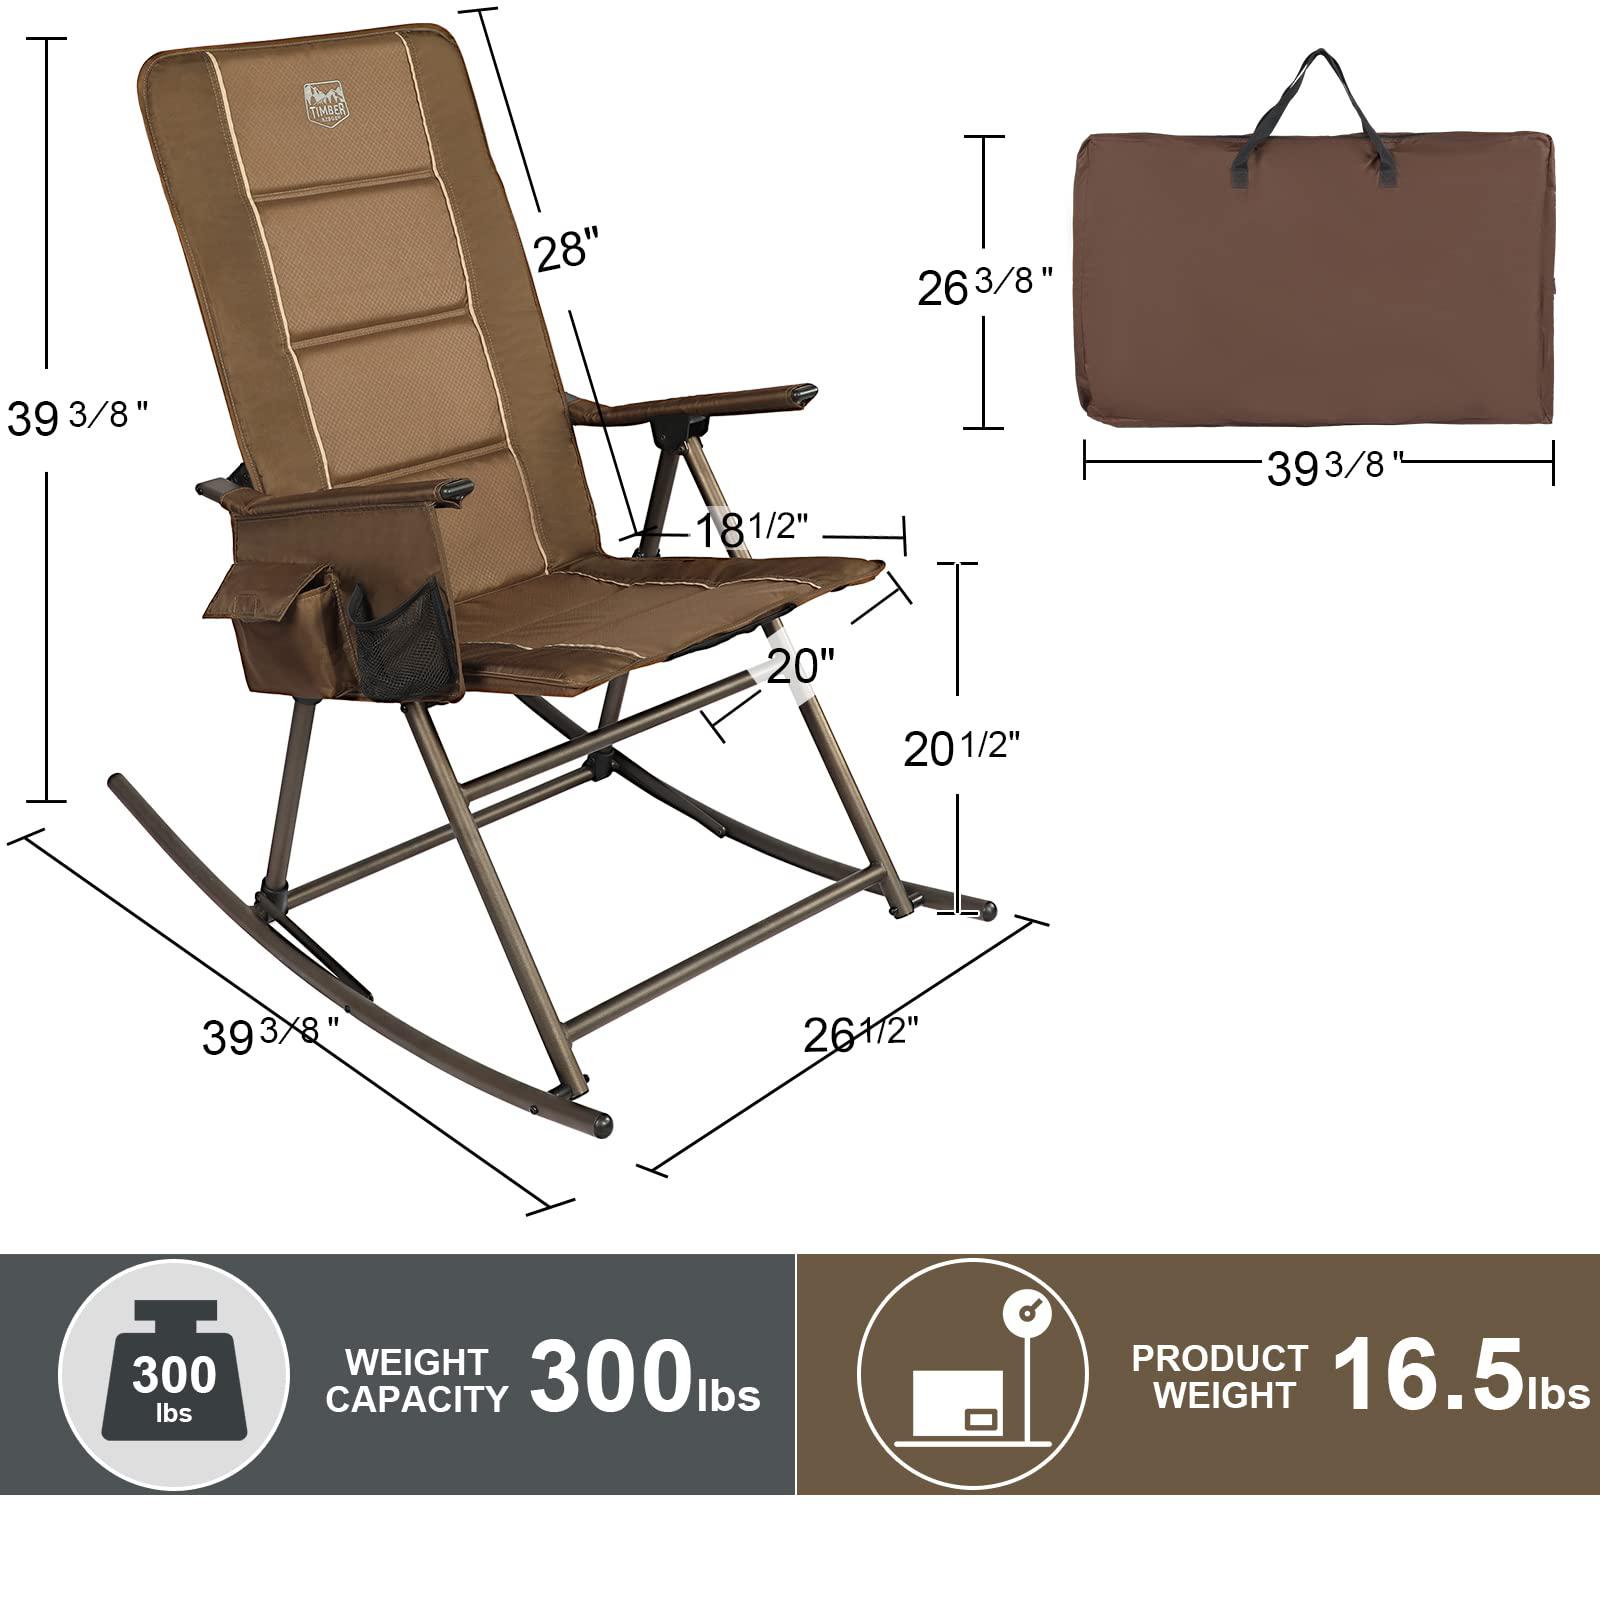 timber ridge padded high back rocker lawn side pocket portable patio rocking chair for camping porch yard garden indoor, heav